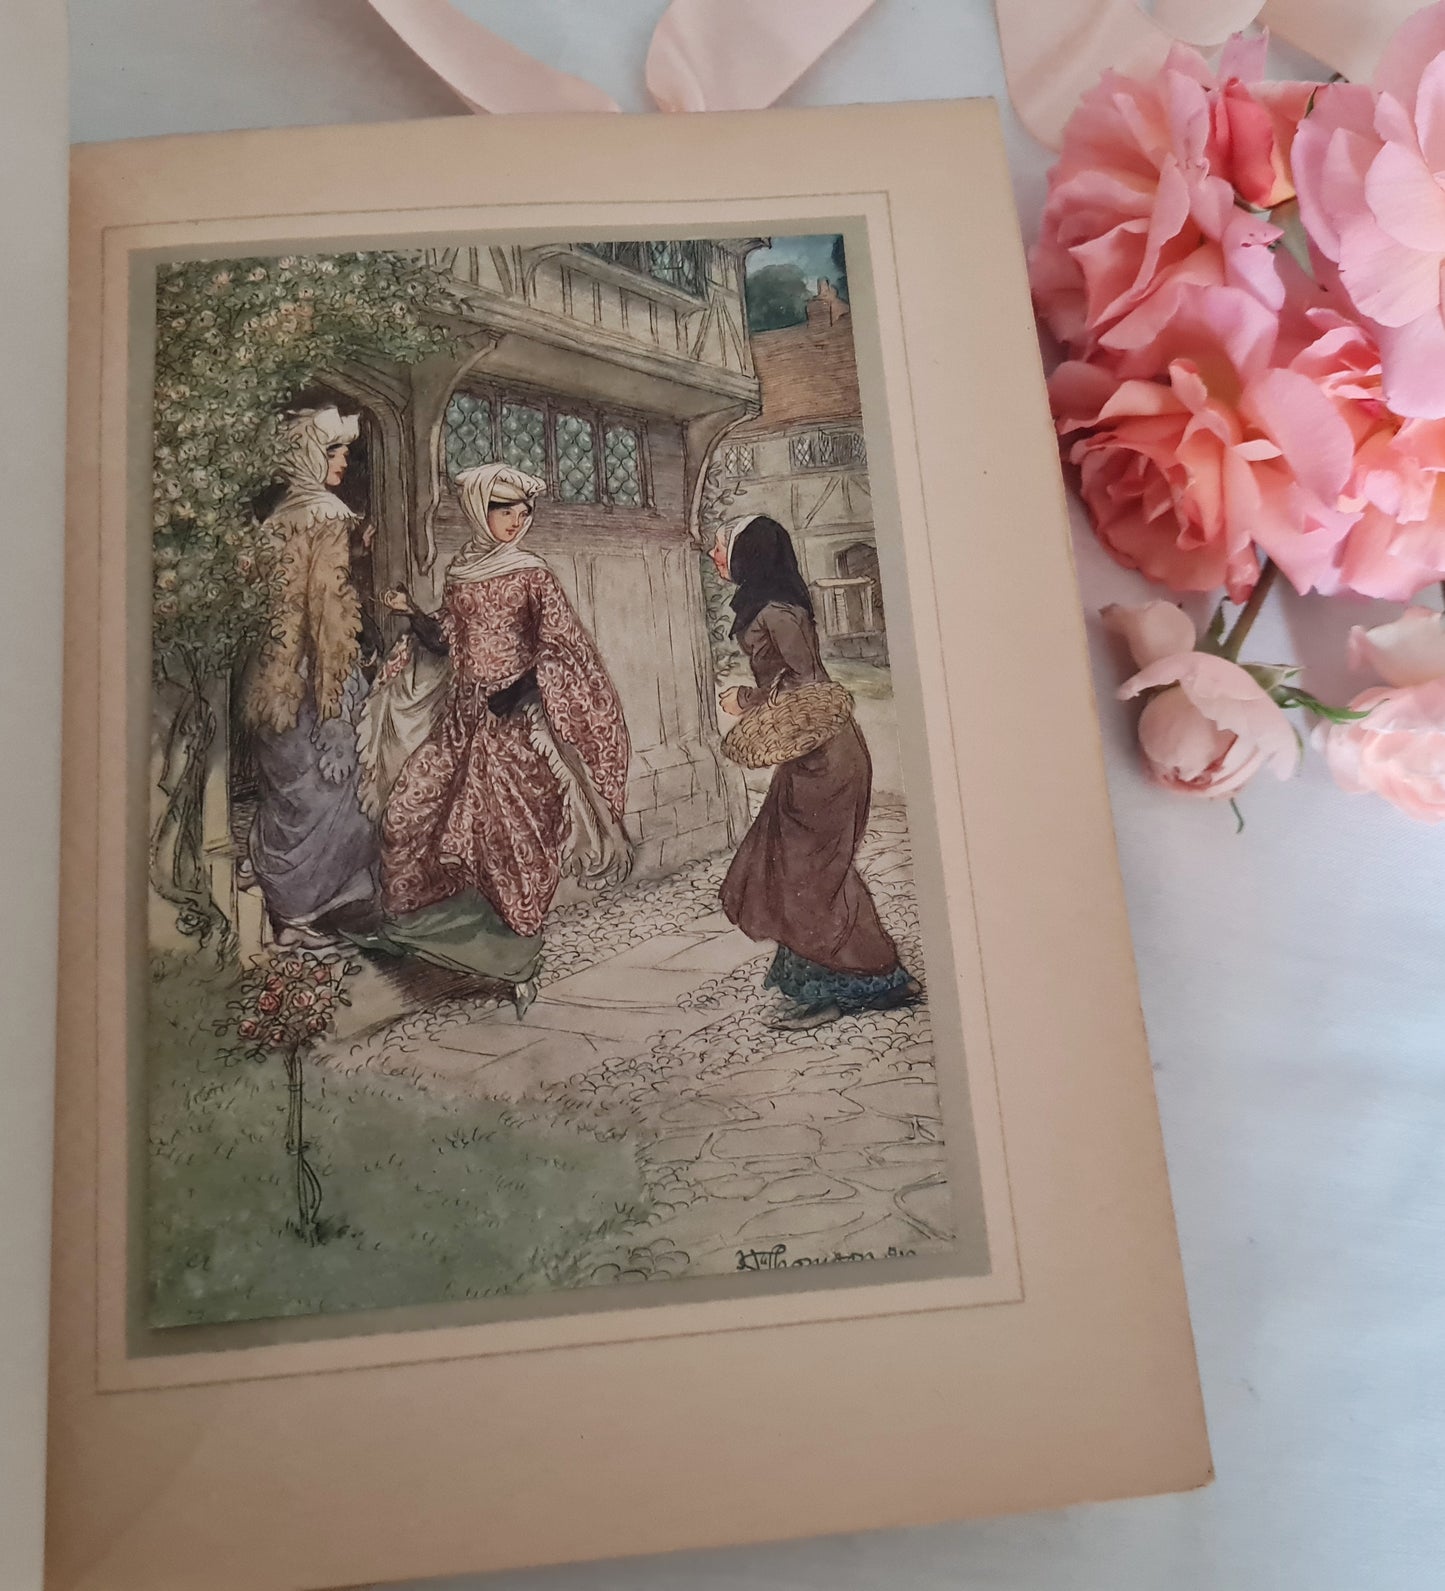 1910 The Merry Wives of Windsor by William Shakespeare / Heinemann, London / Large Format Antique Book / Beautifully Illustrated by Thomson